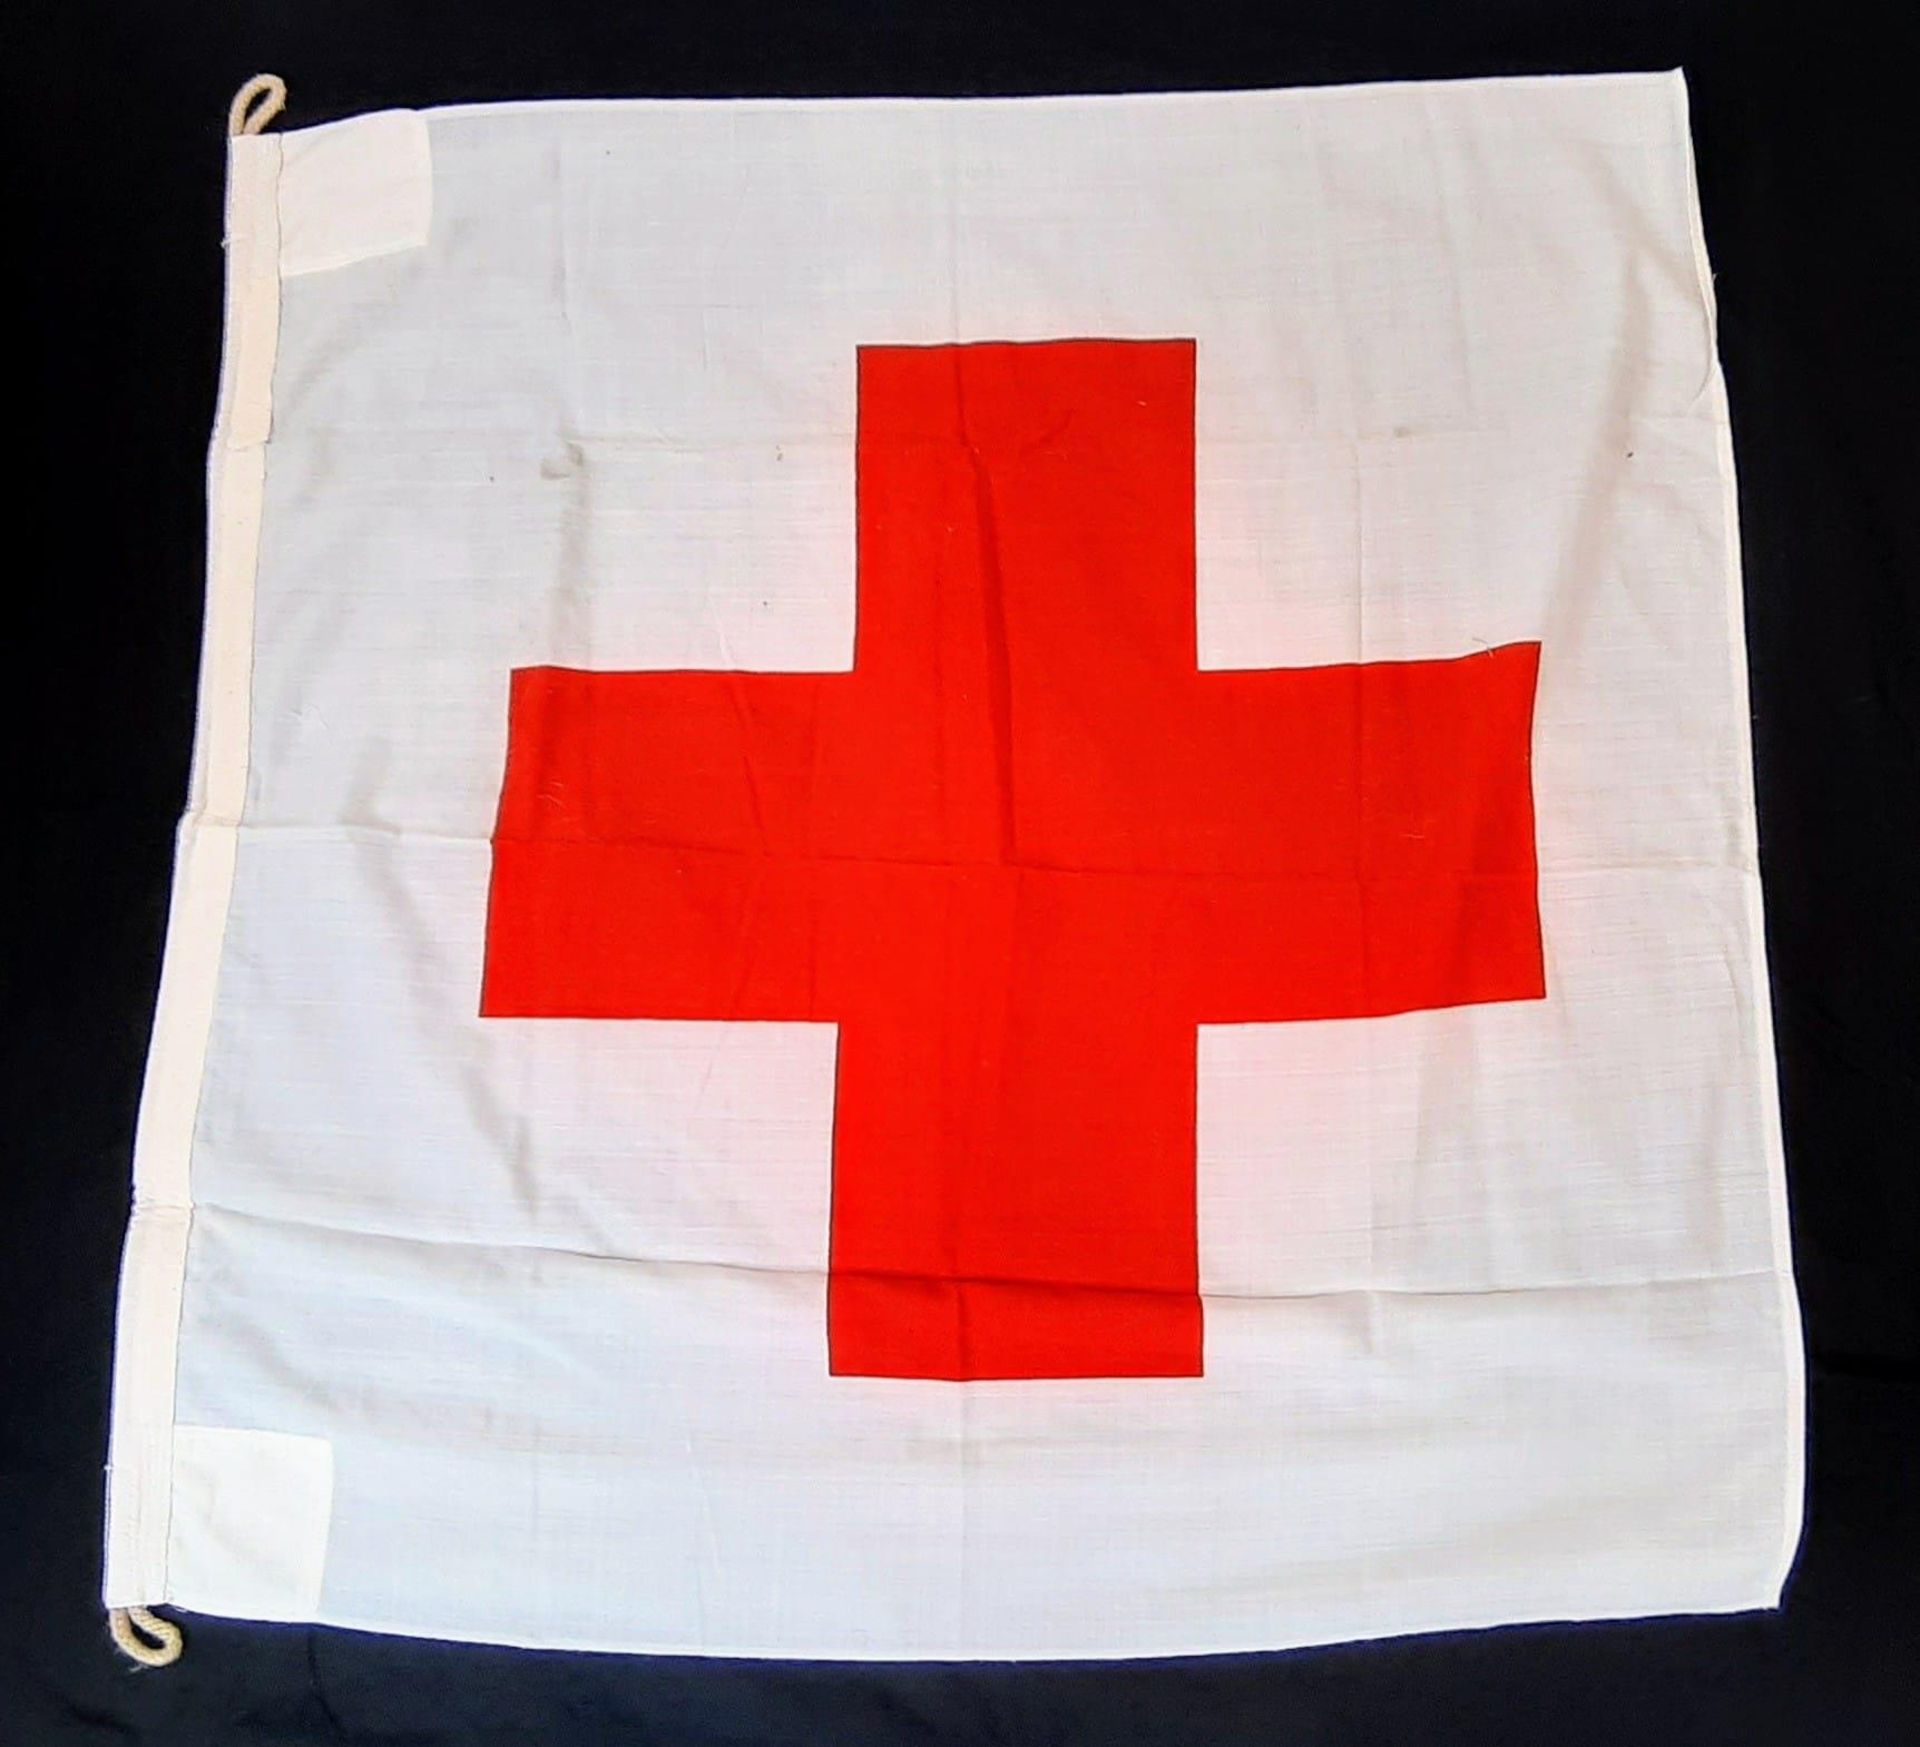 Un-Issued 1944 Dated German Field Hospital Tent Drape Flag. Form War stocks found in Norway